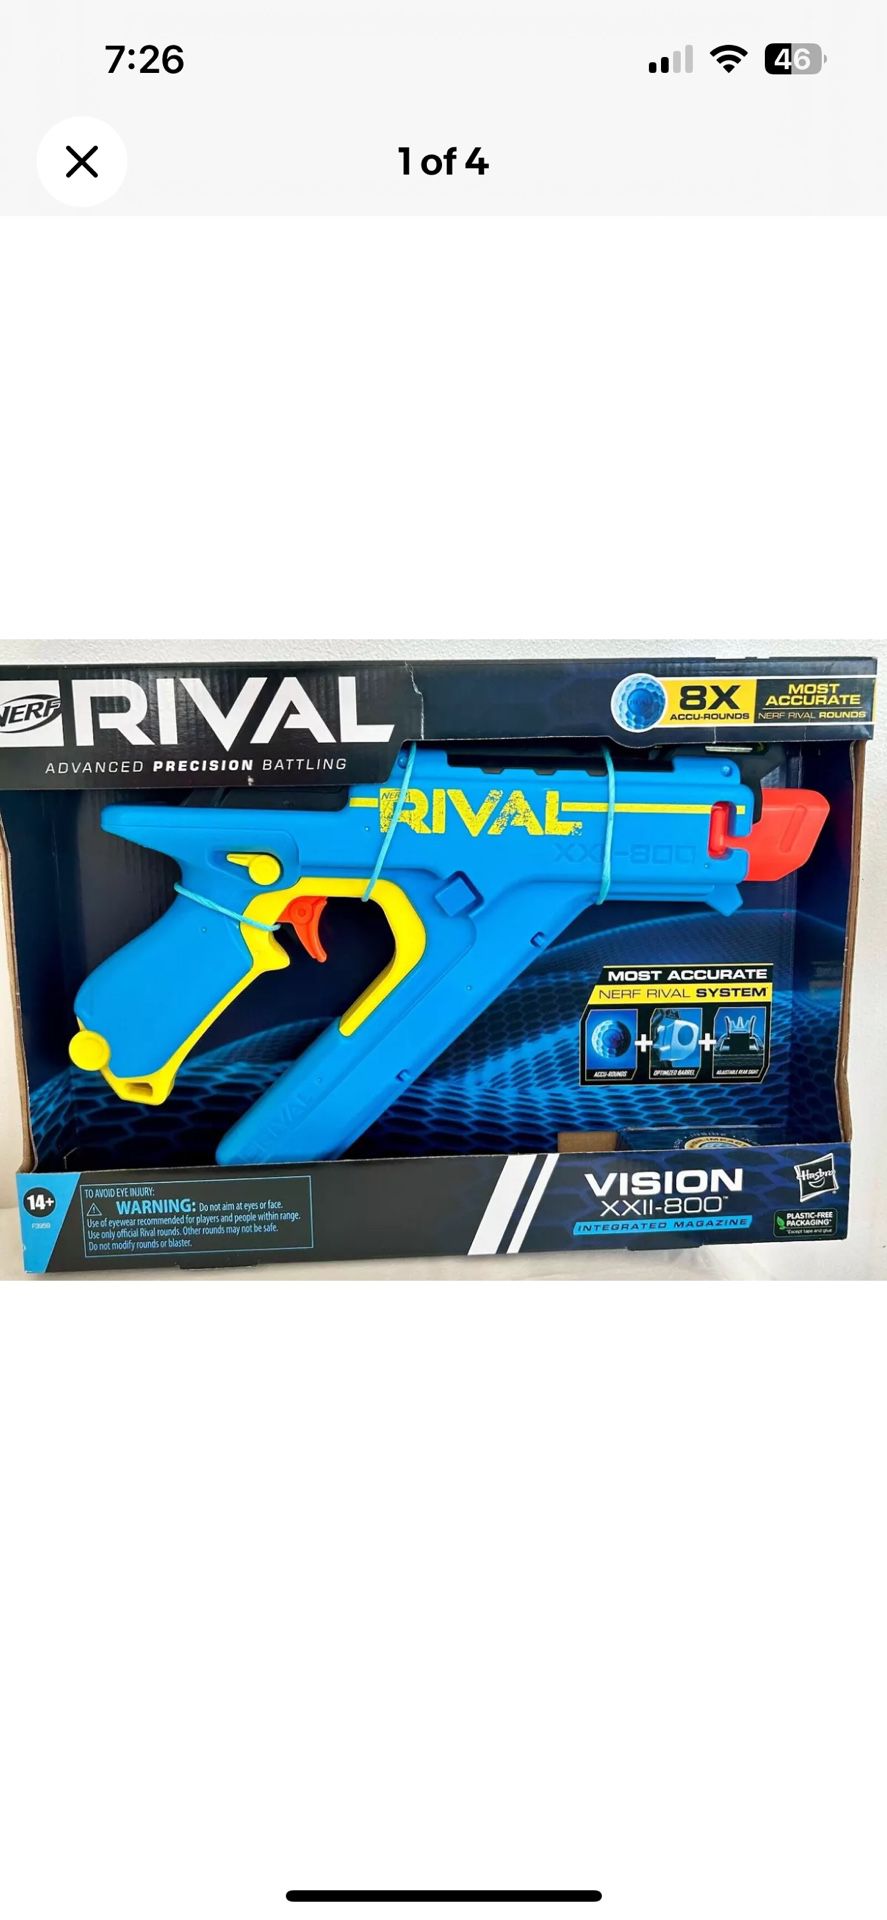 Nerf Rival Vision XXII-800 